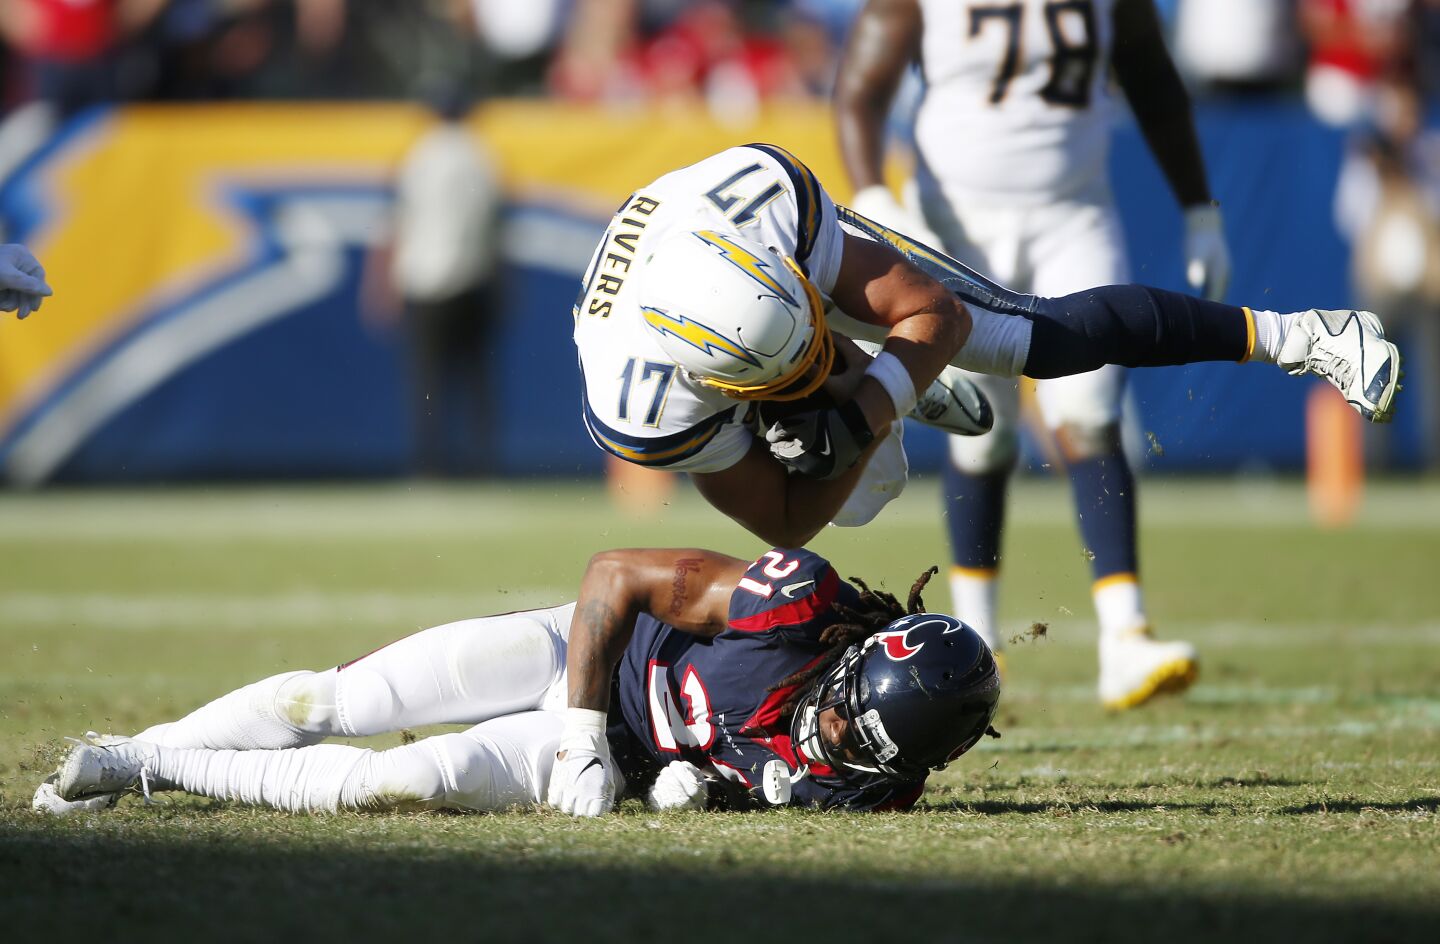 Los Angeles Chargers Philip Rivers is tripped up by Houston Texans Bradley Roby in the 4th quarter in Carson on Sept. 22, 2019.